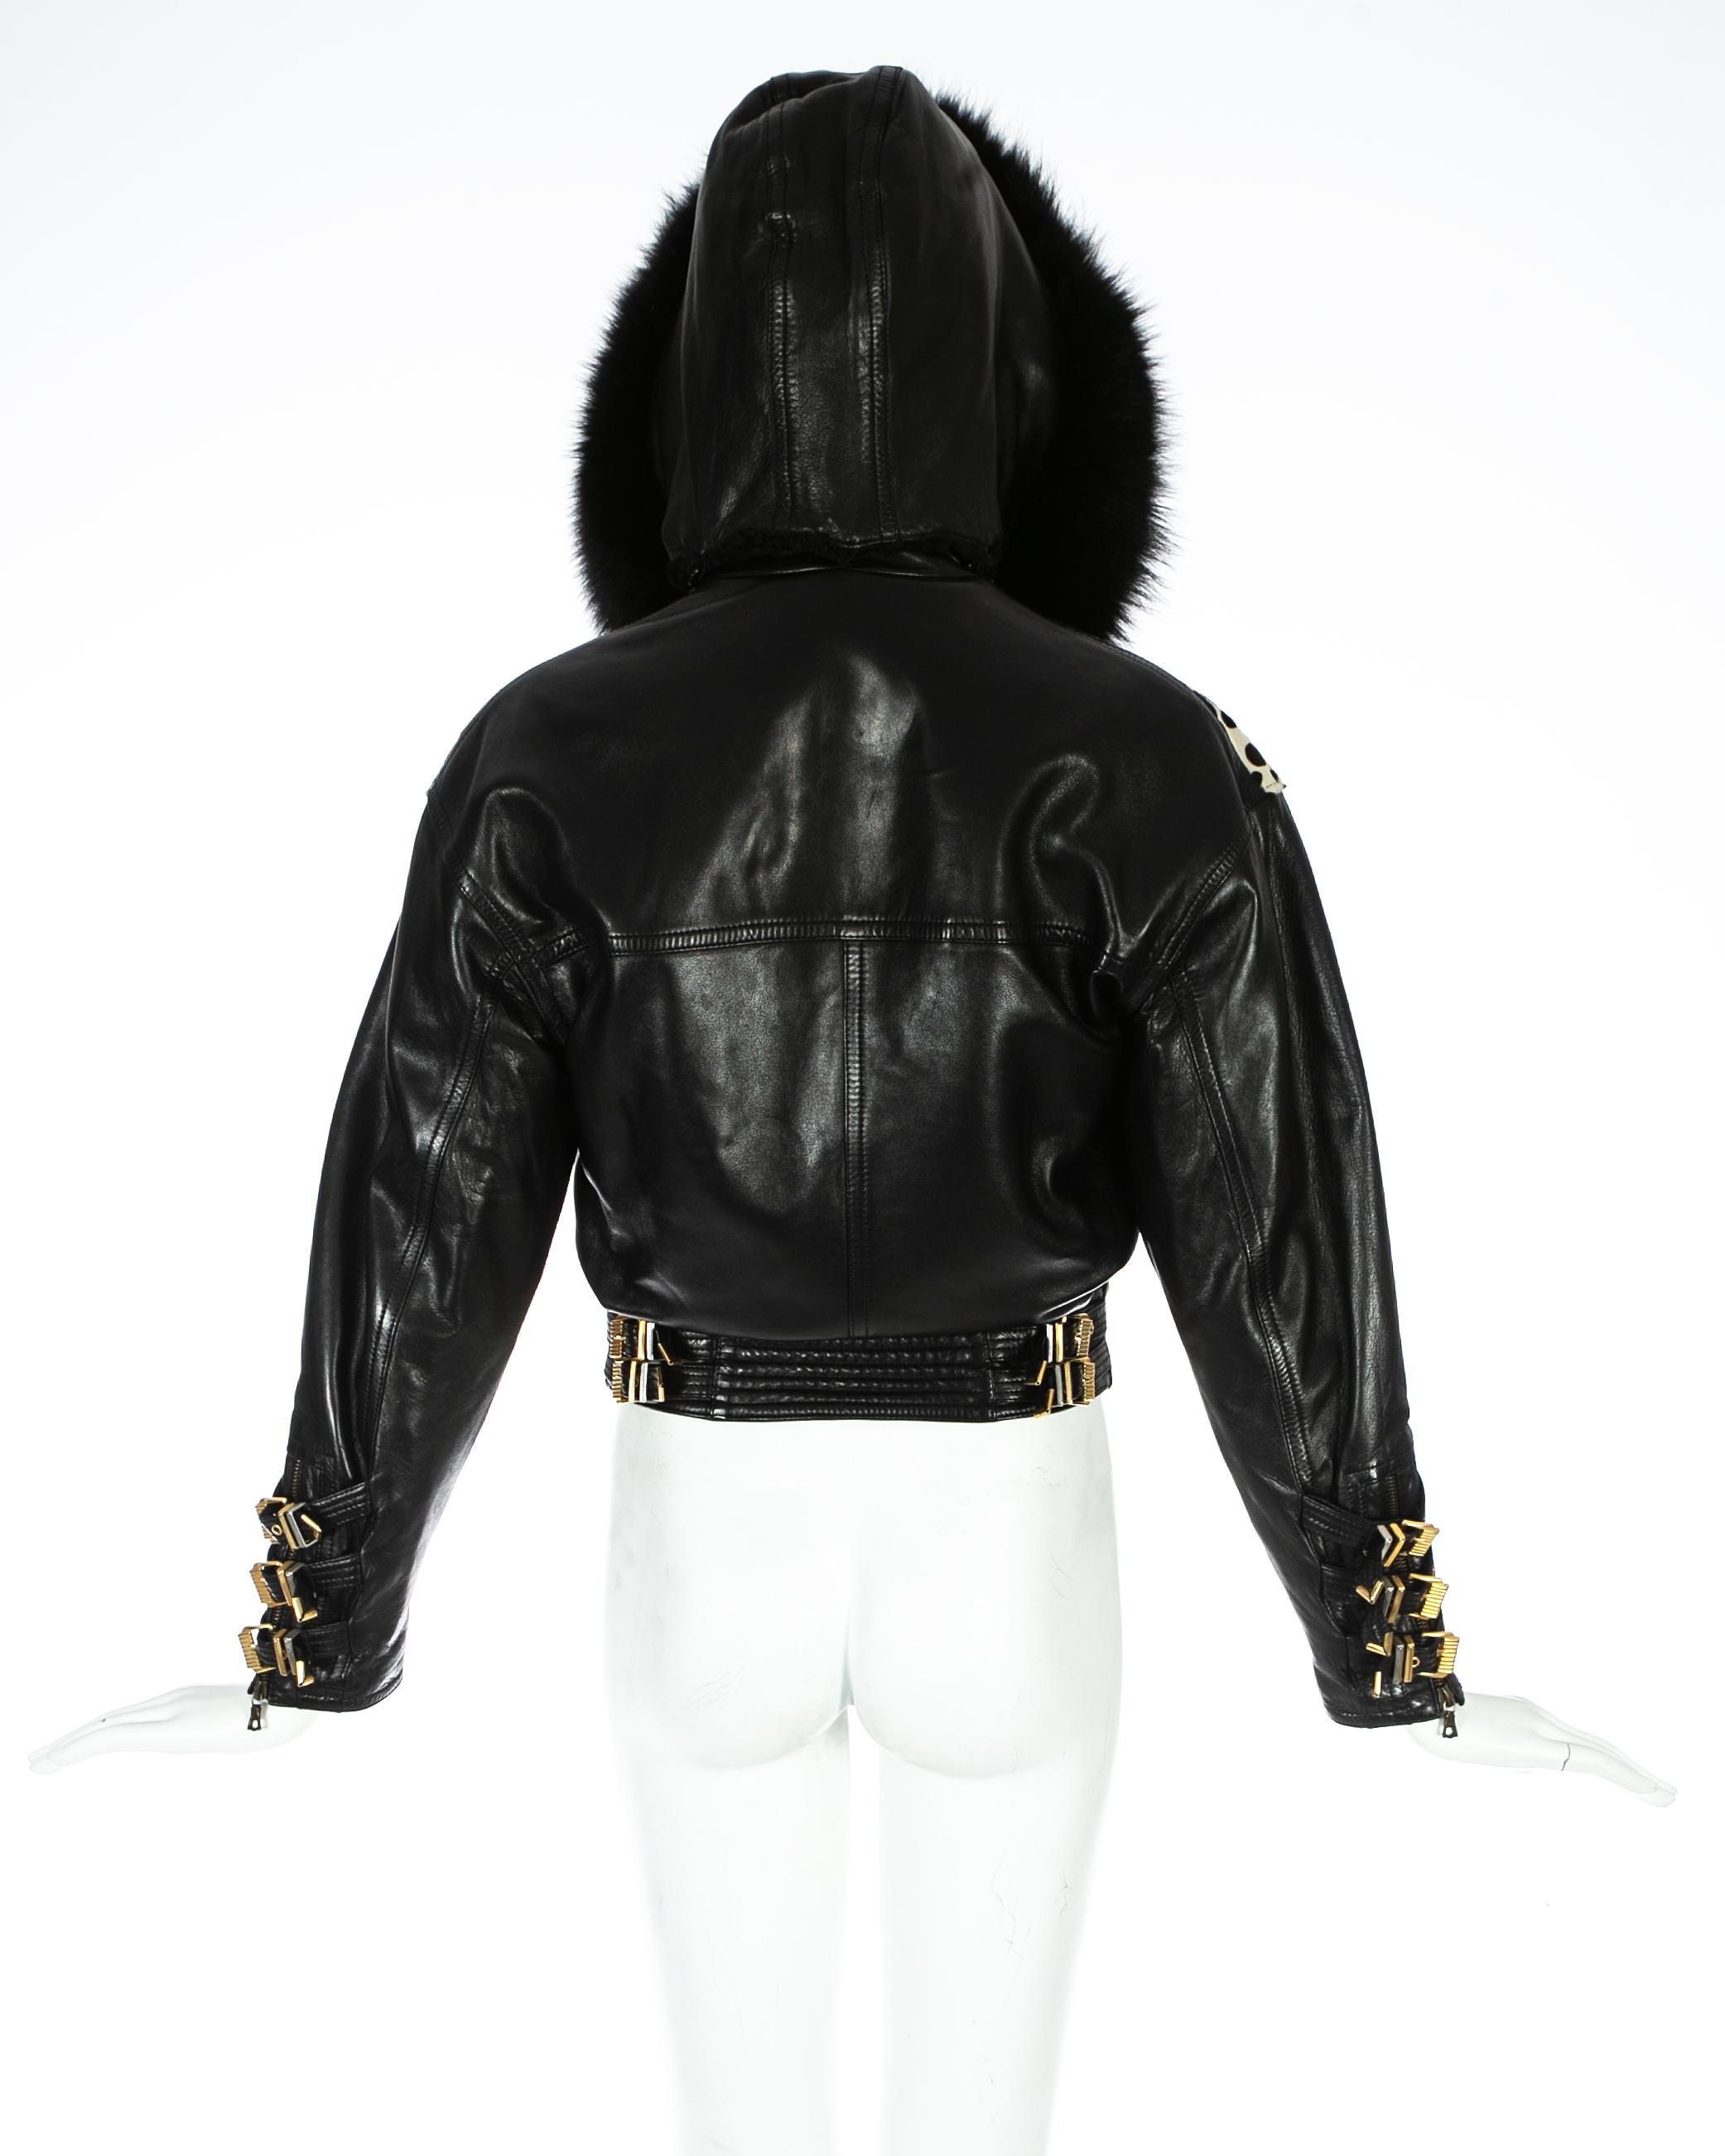 Gianni Versace black leather and pony hair bomber jacket with fur hood, AW 1992 In Good Condition For Sale In London, GB